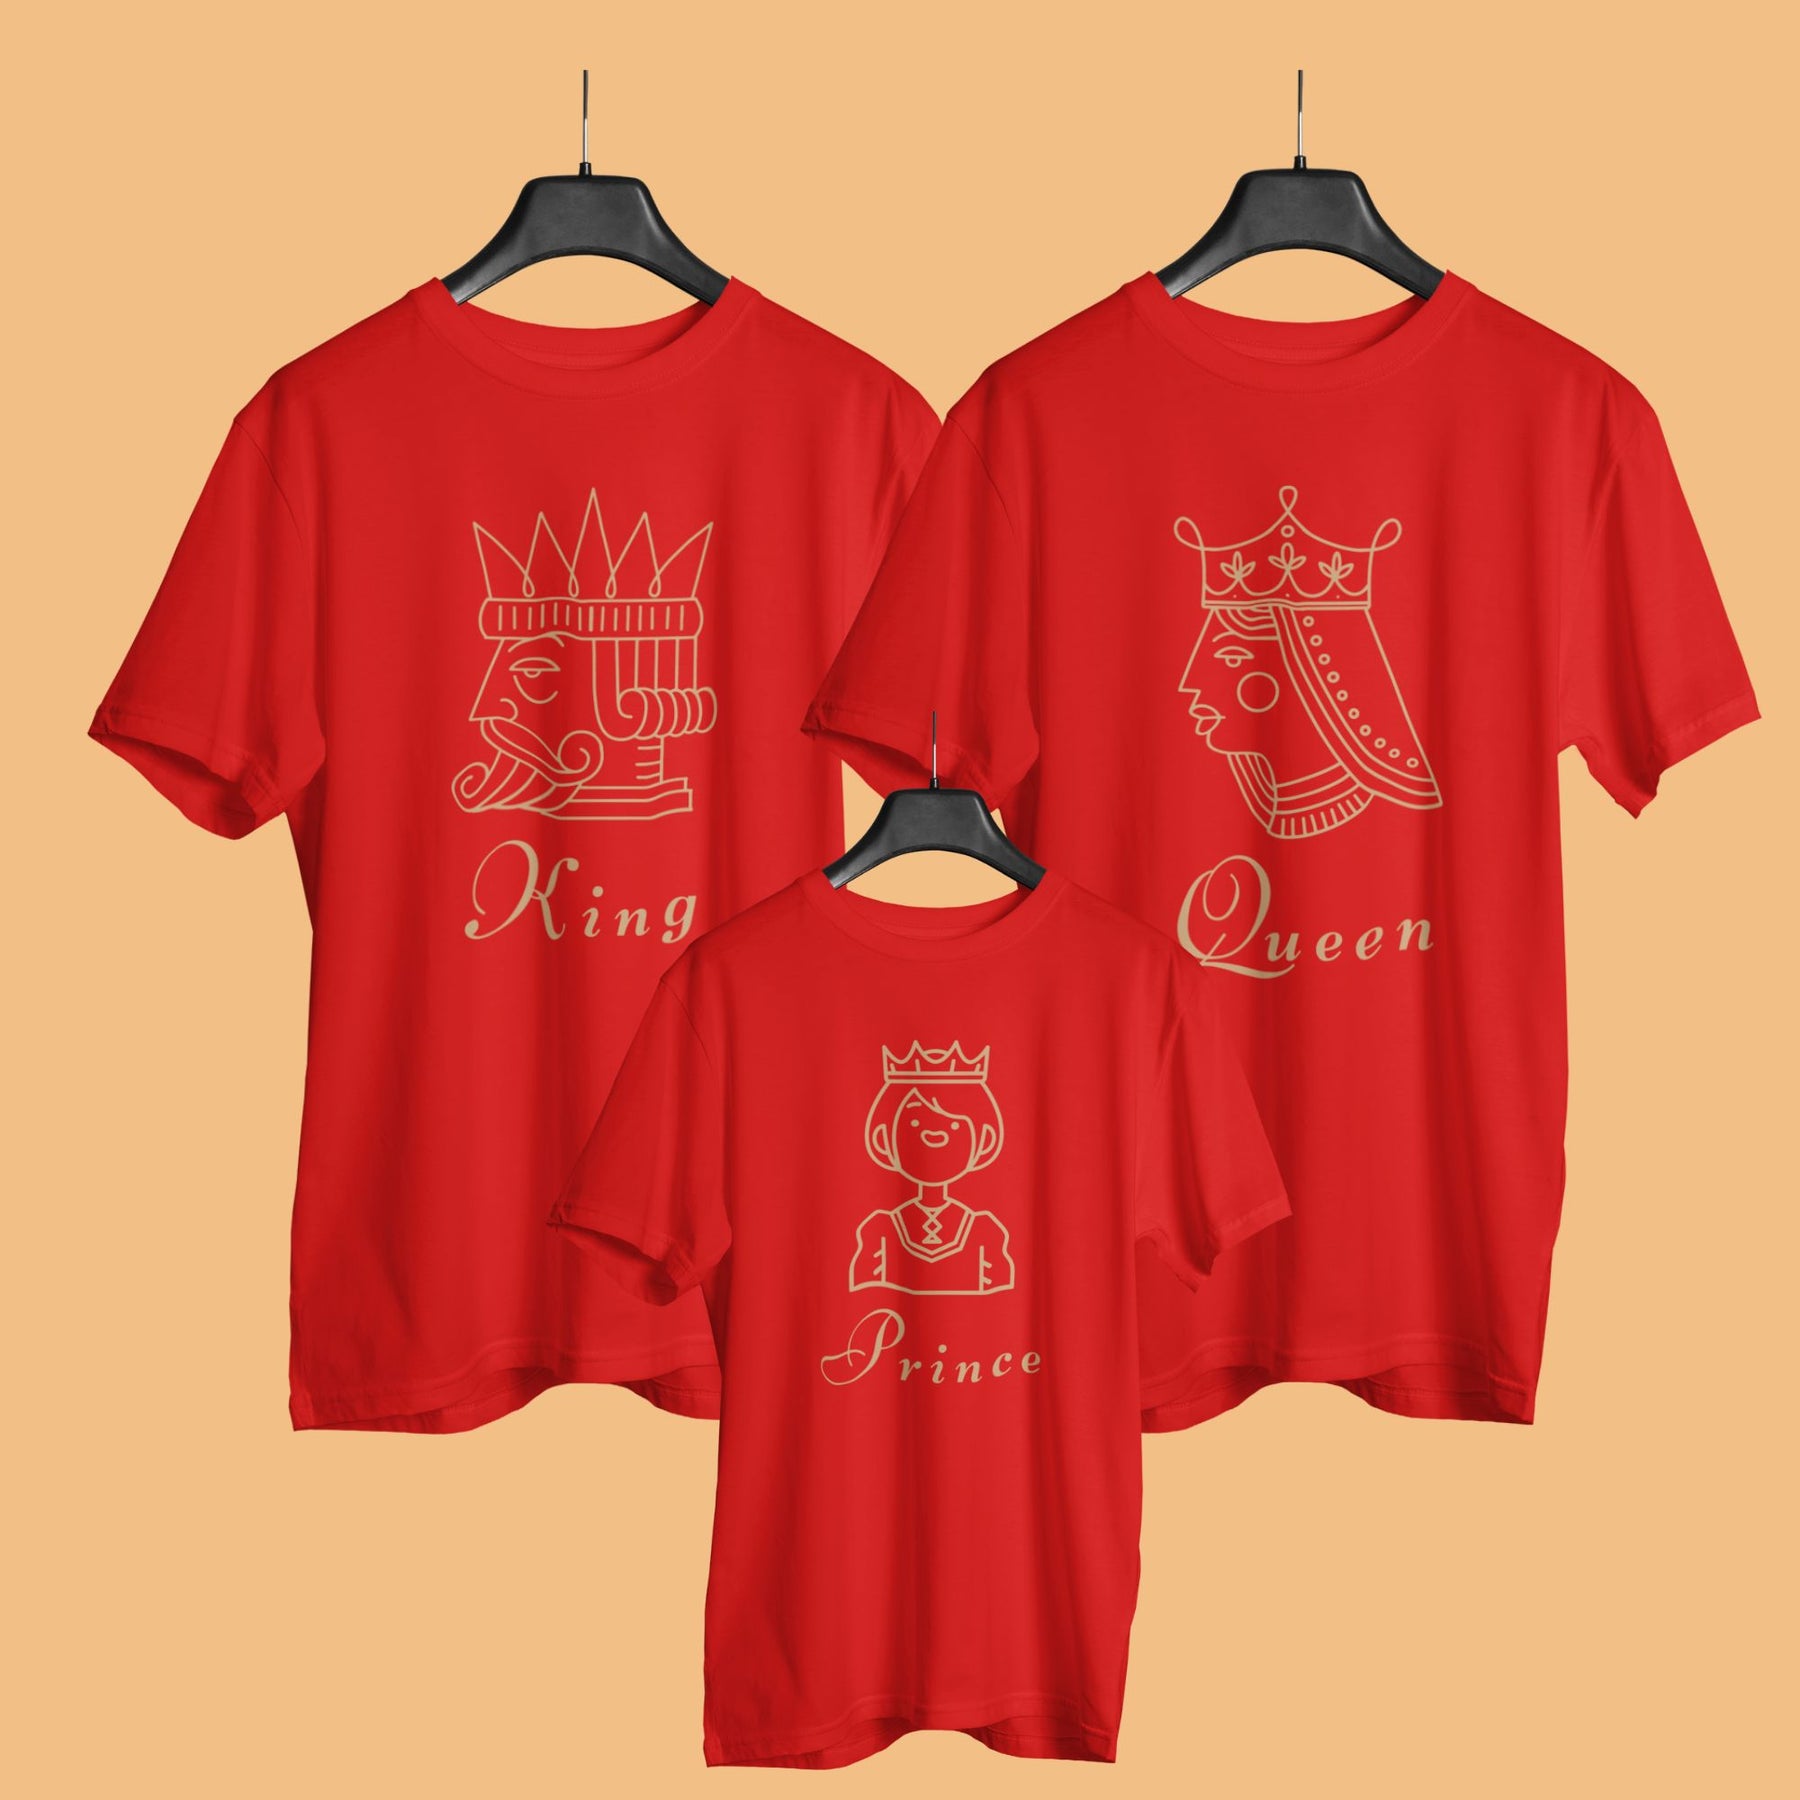 king-queen-prince-matching-family-red-t-shirts-for-mom-dad-daughter-gogirgit-hanger